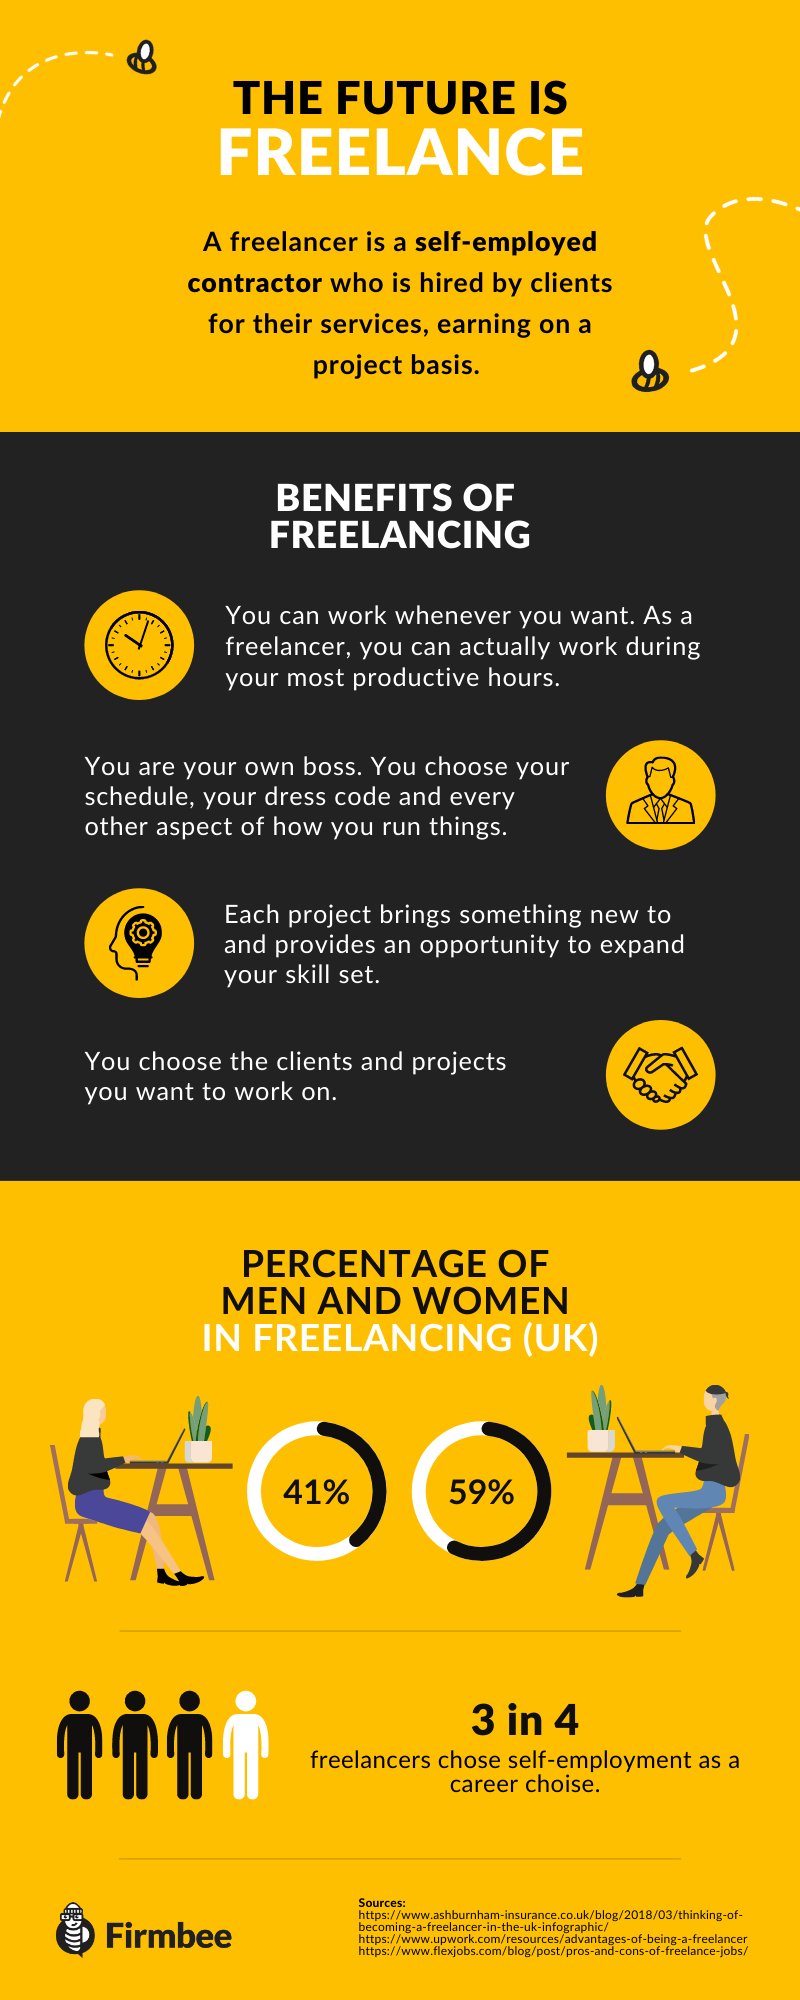 freelance is the future infographic